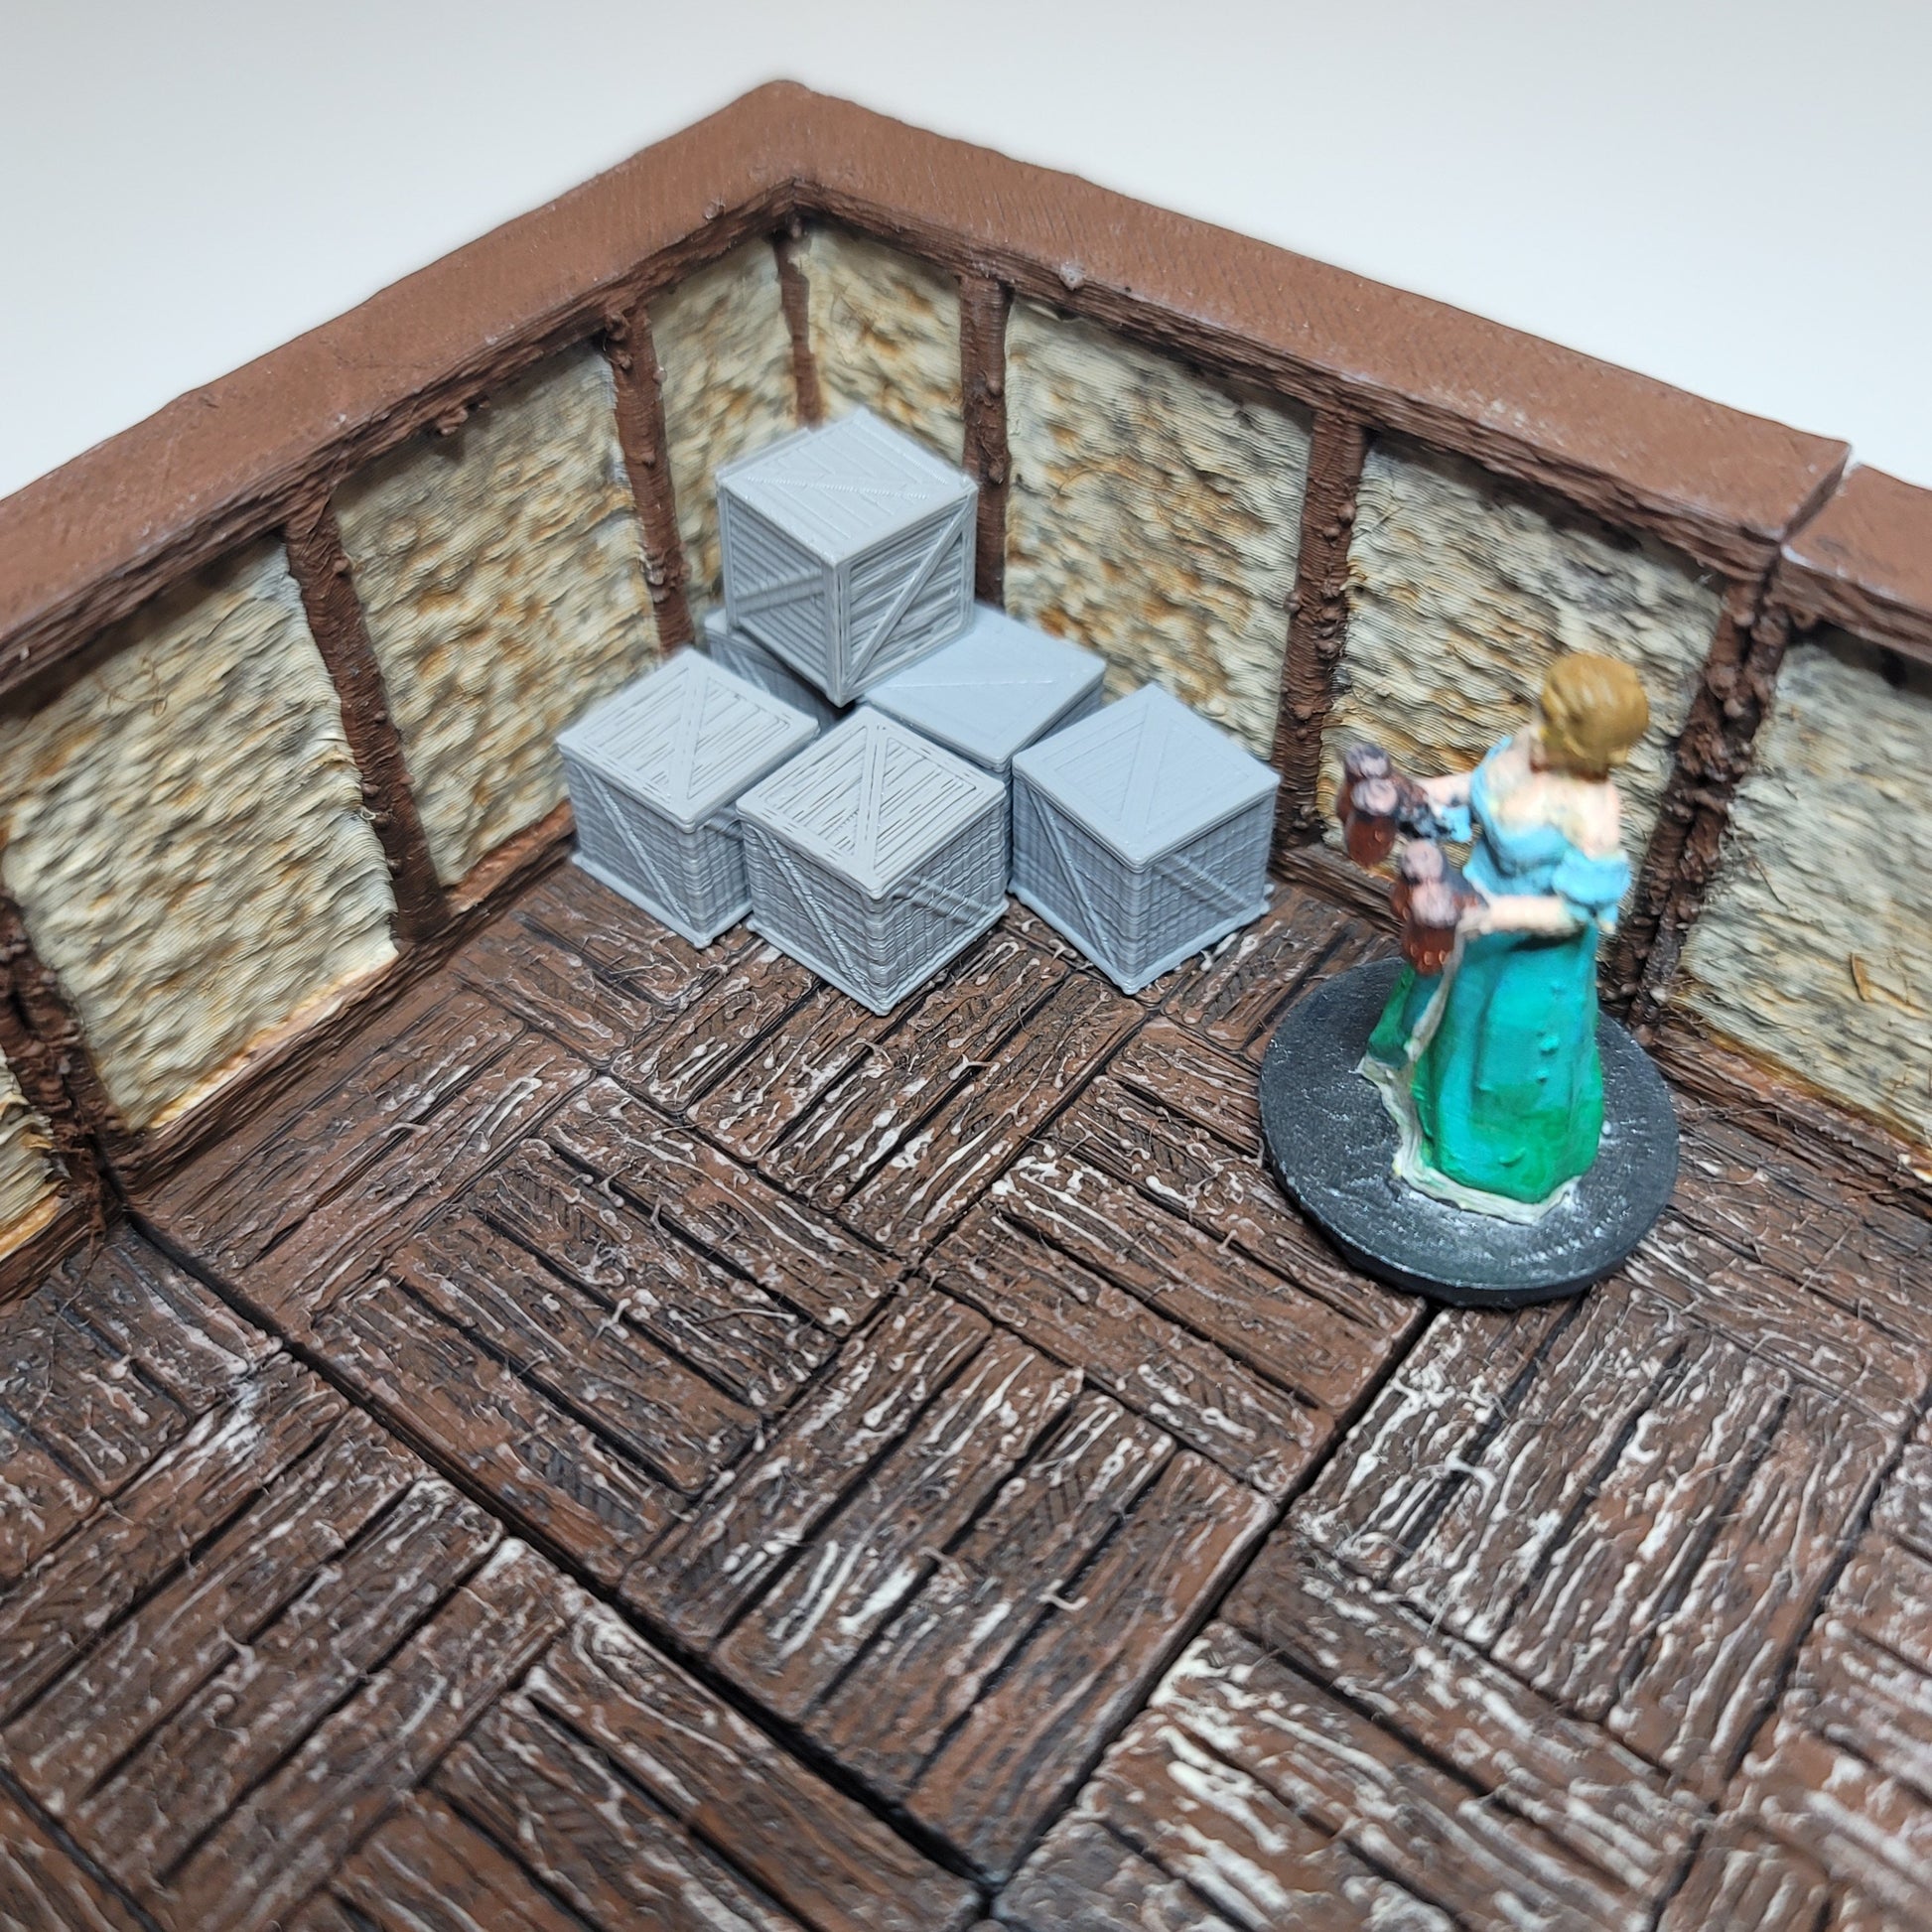 Small Wooden Storage Crates - 8k | RPG Scatter Terrain | 3D printed | 28mm | 32mm | Terrain Scatter - CreatorpultGames - Role Playing Miniatures